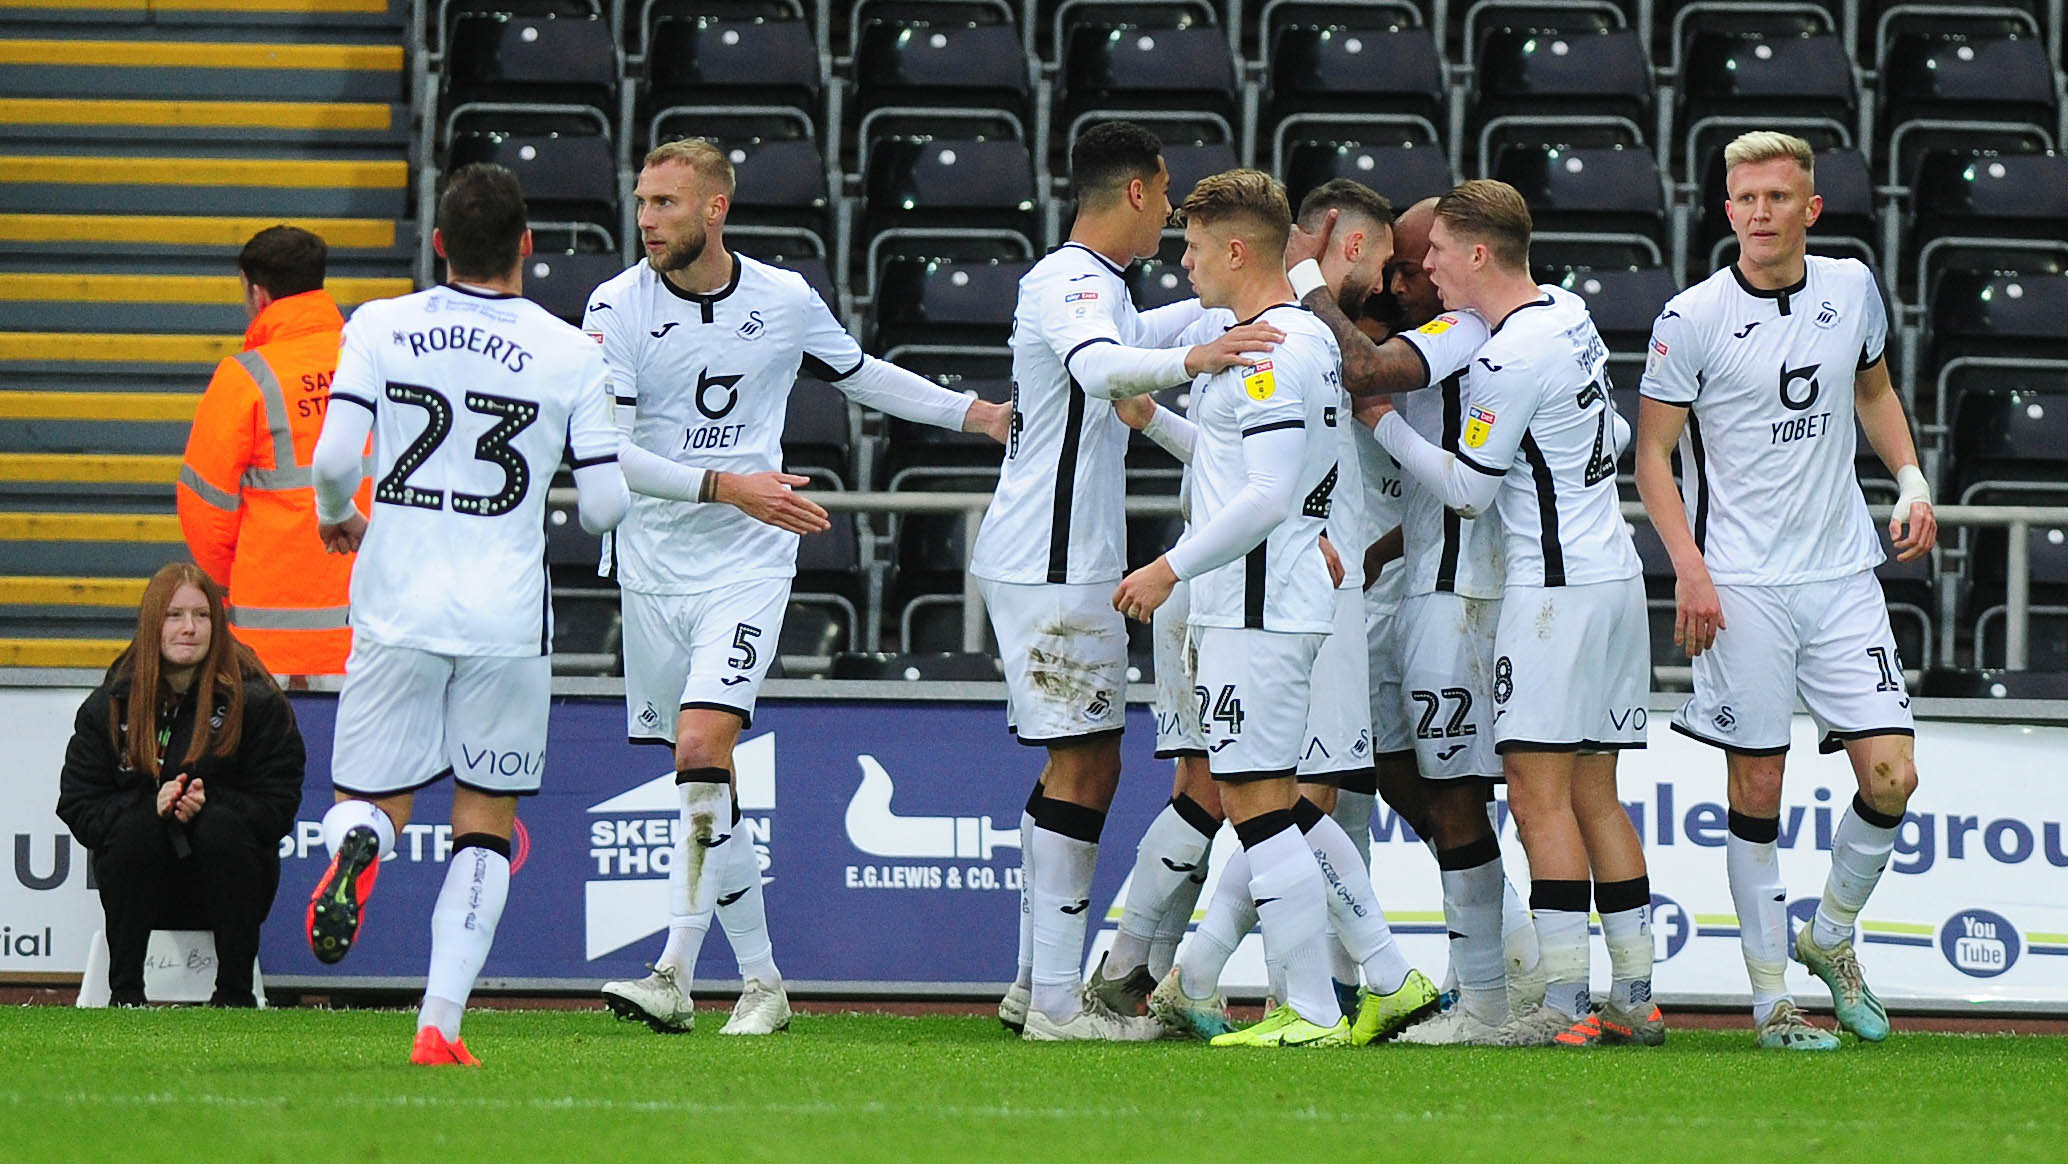 The Swans squad celebrate a goal